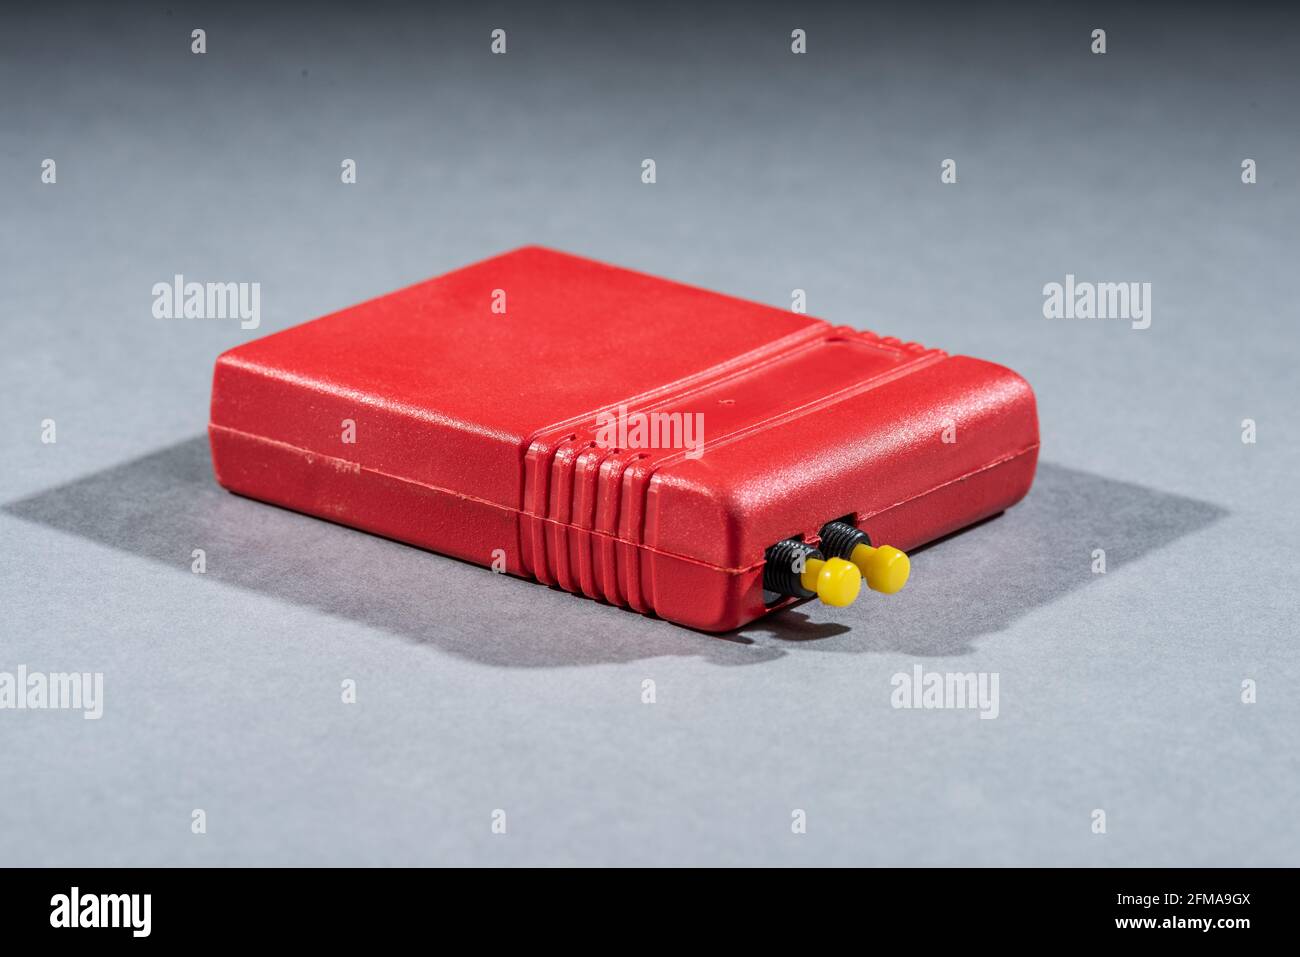 Data cartridge for a 1980s computer. Red with two yellow buttons. Stock Photo